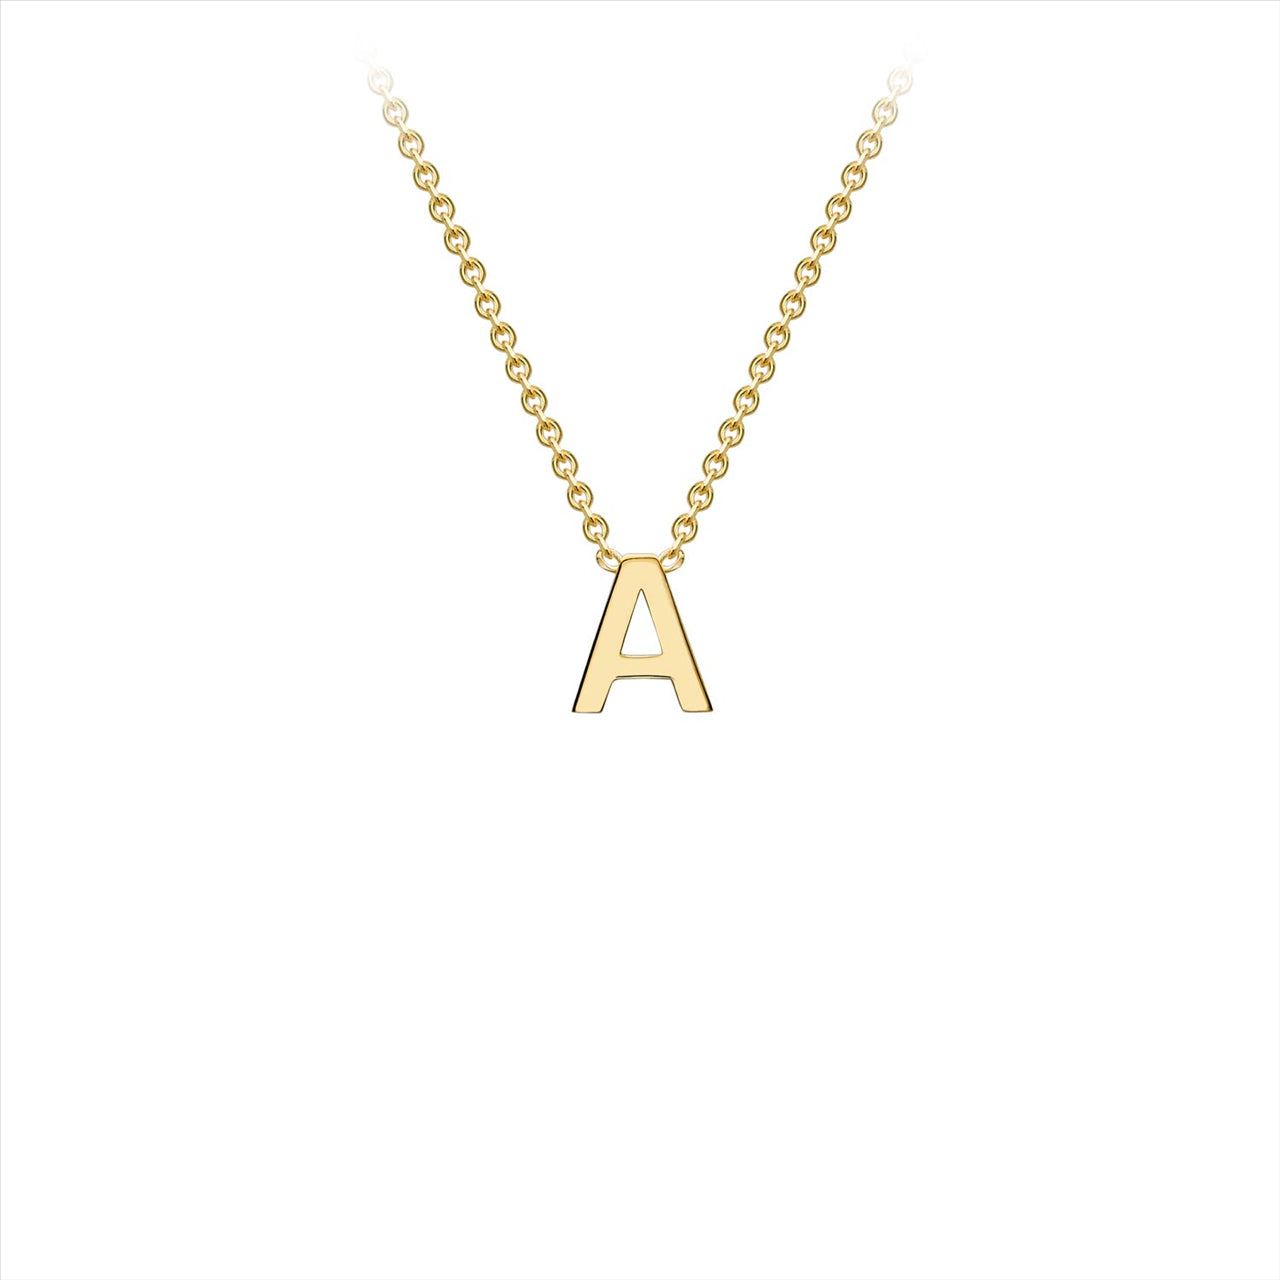 9K Yellow Gold 'A' Initial Adjustable Necklace 38cm-43cm